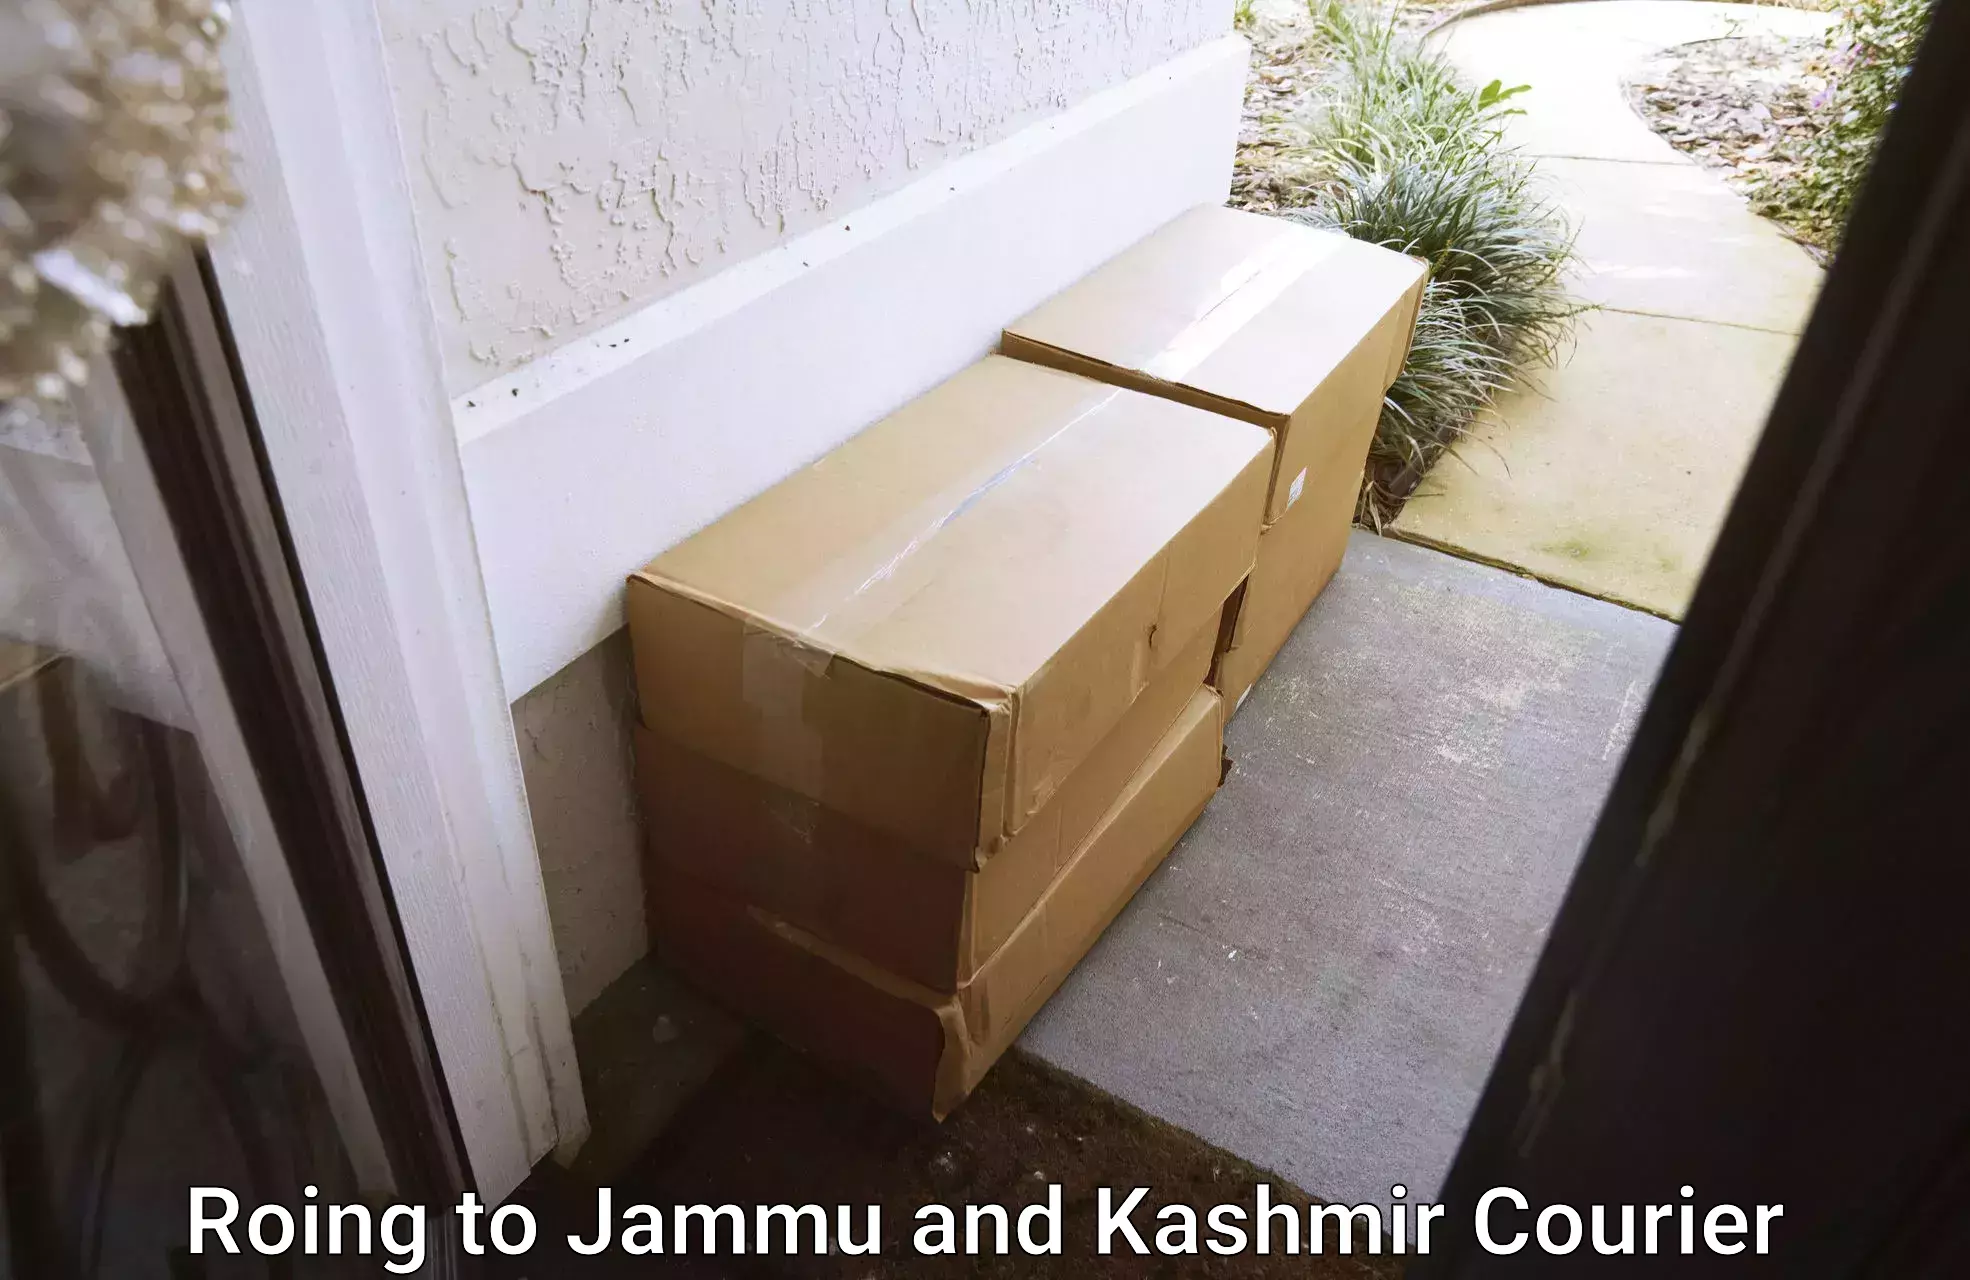 Express courier capabilities in Roing to Jammu and Kashmir